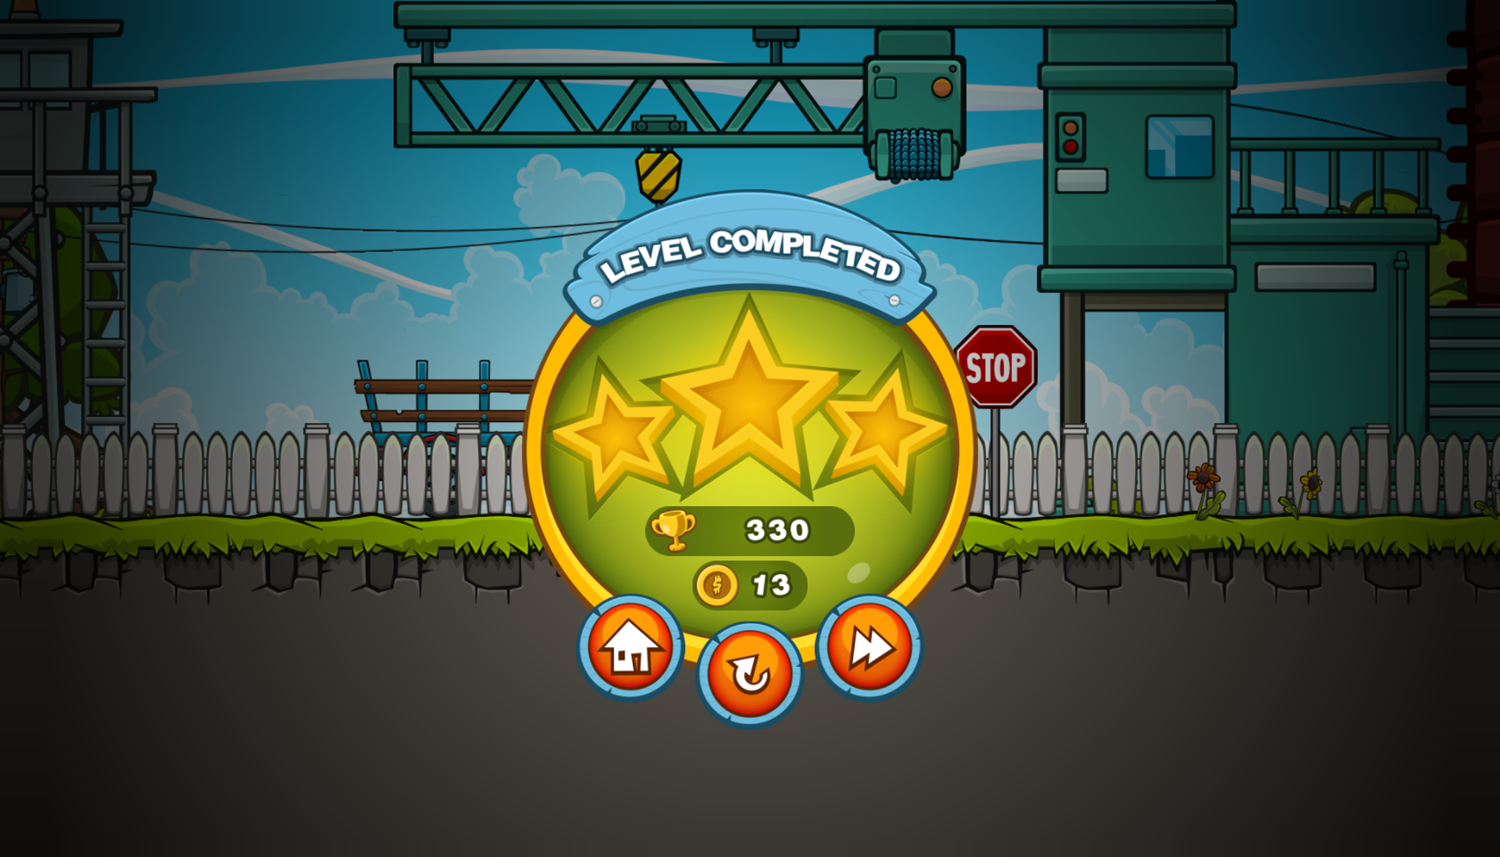 Tractor Mania Game Level Completed Screenshot.